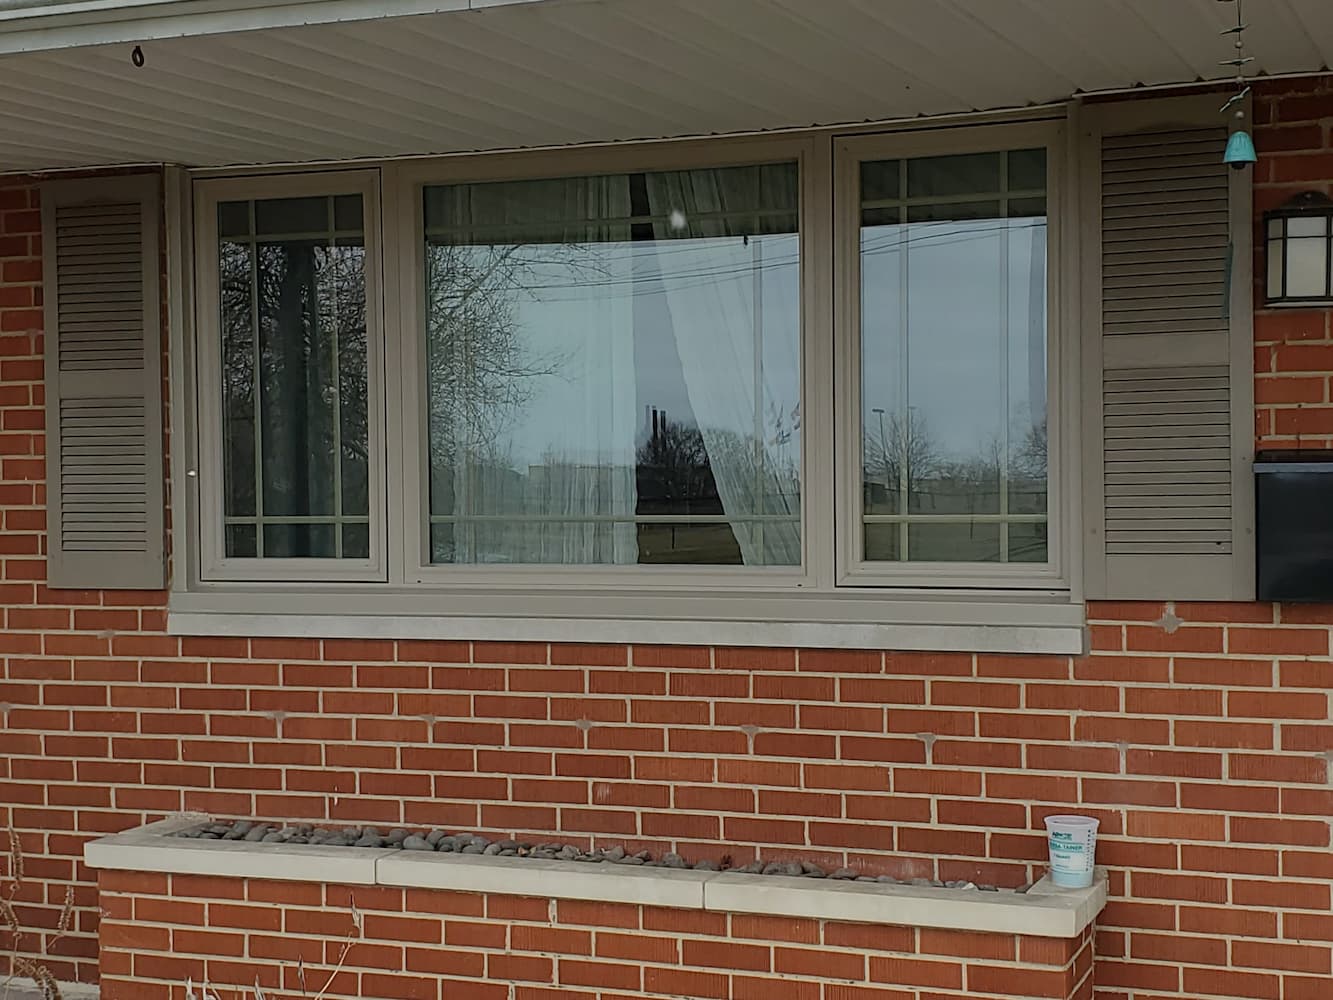 After exterior shot of new Pella windows on front of Kettering home